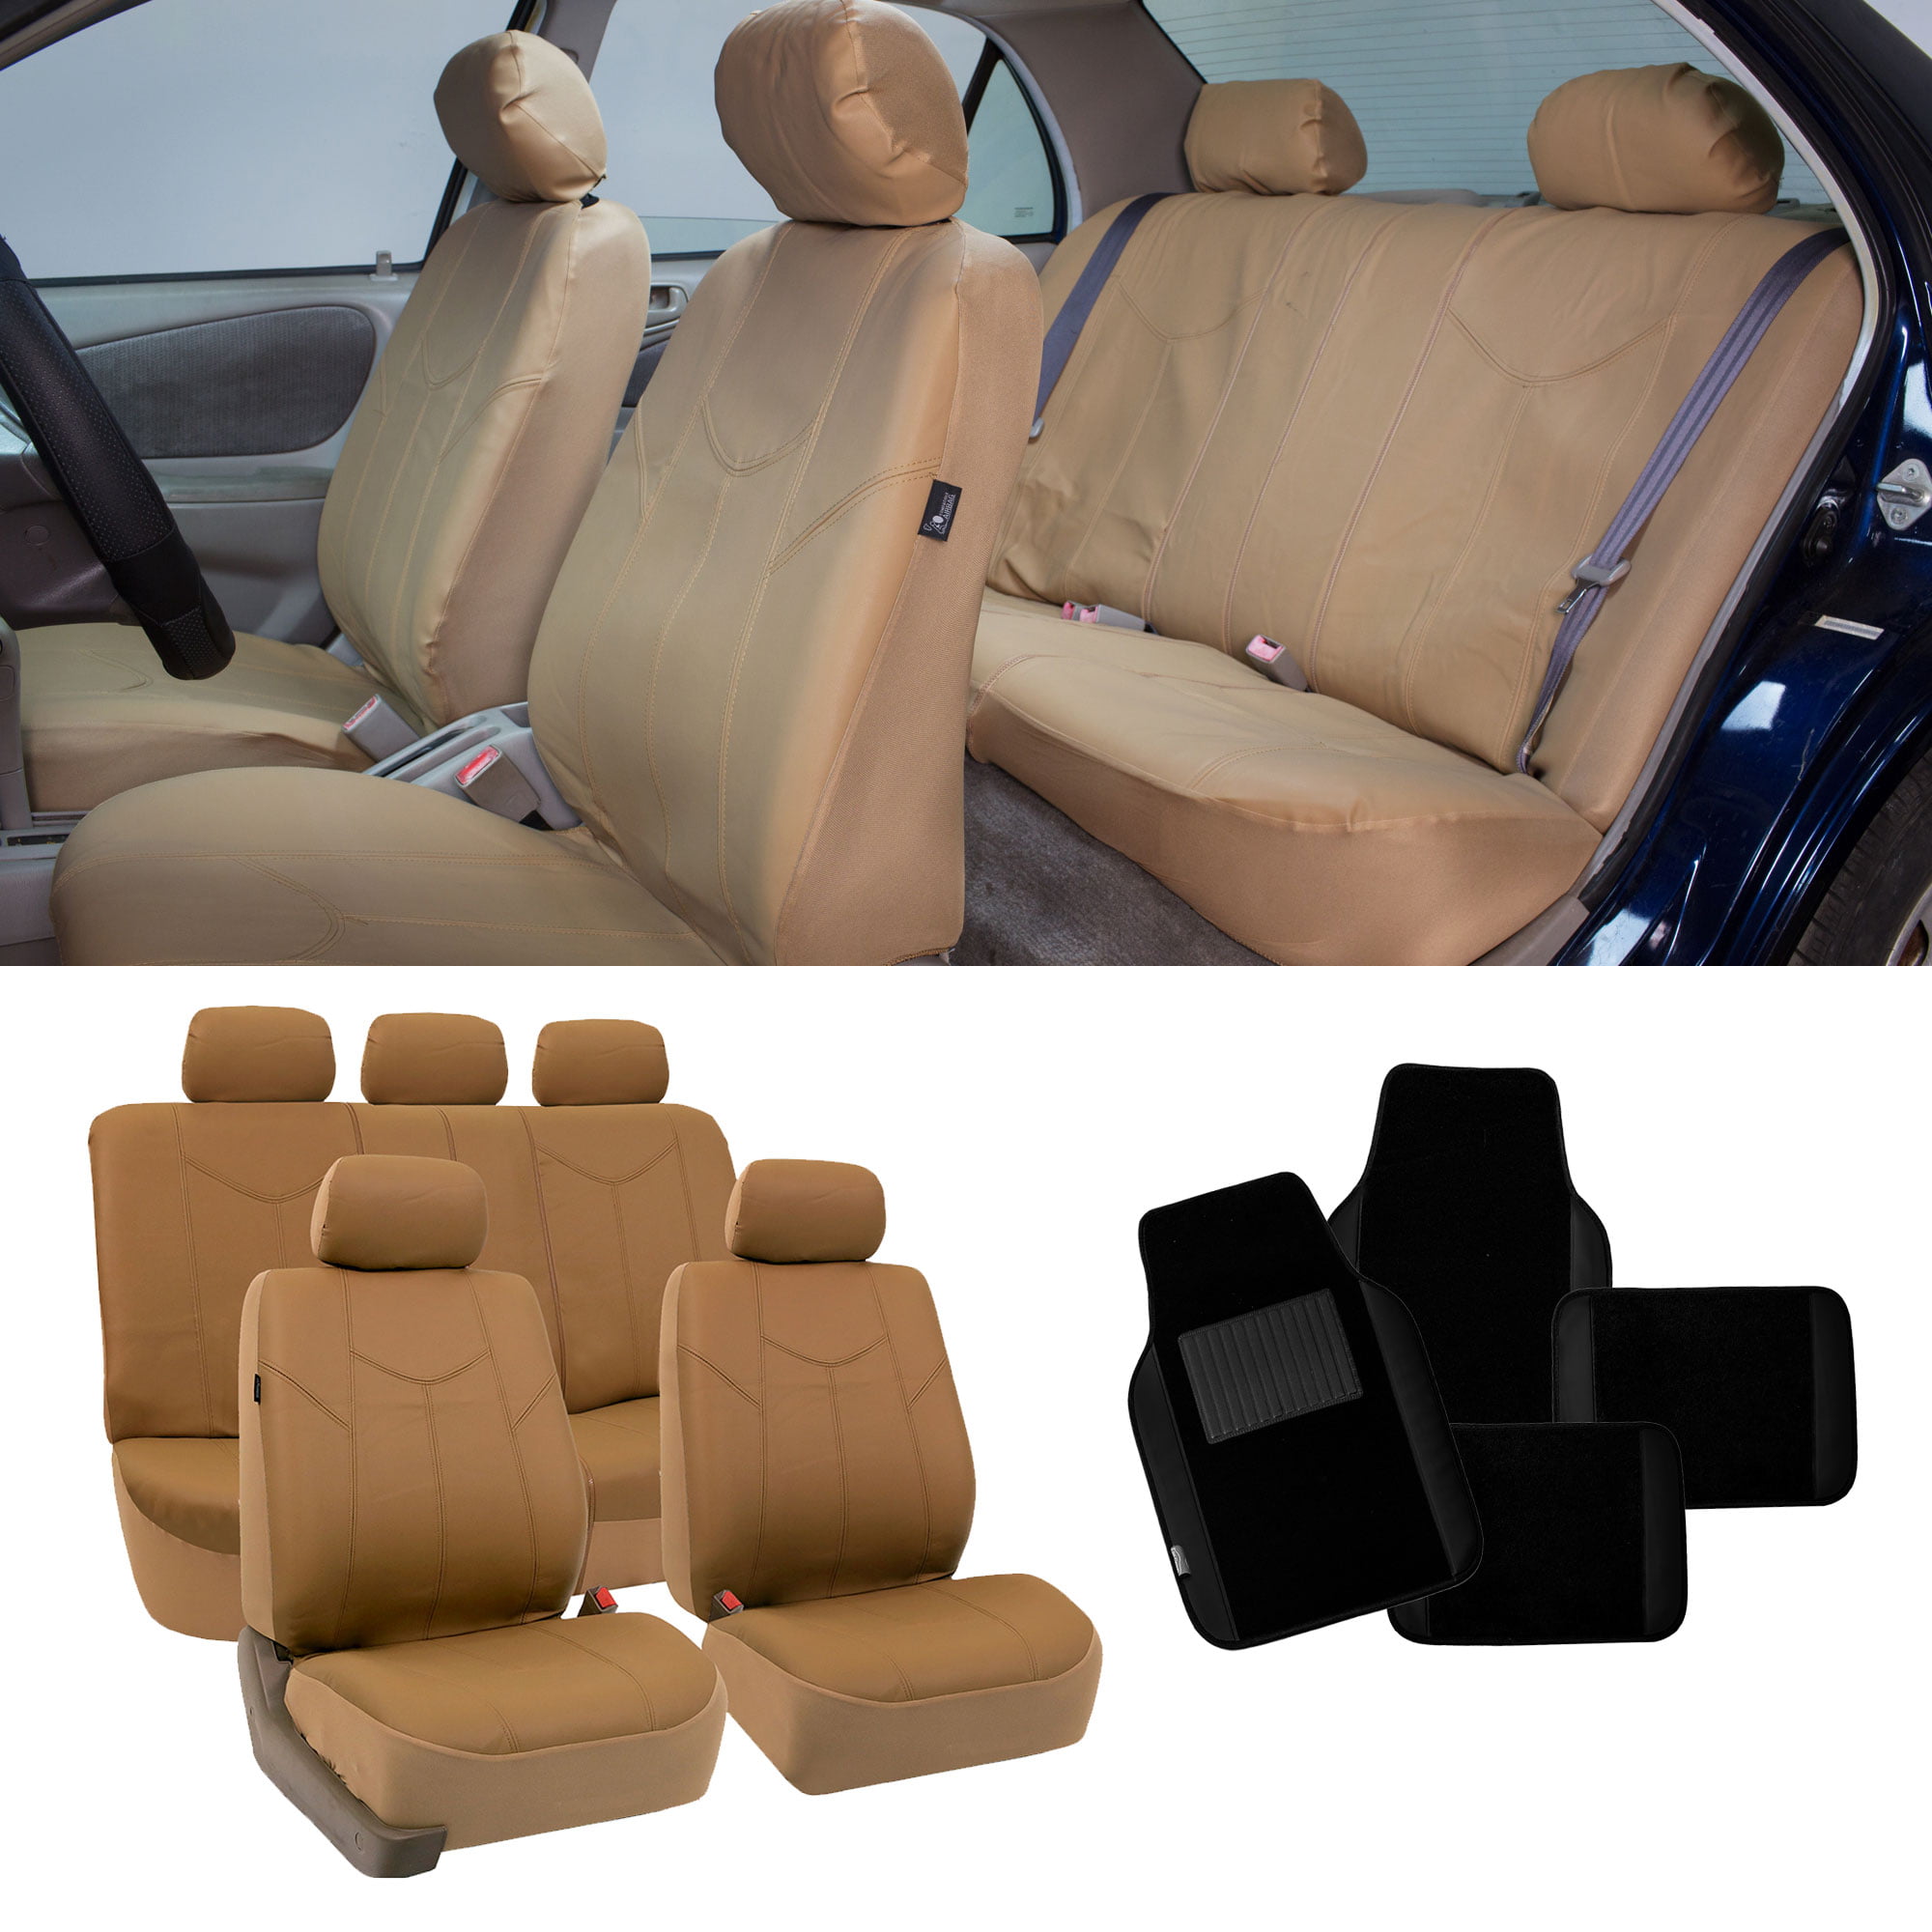 PU Leather Airbag Compatible Split Bench Seat Covers for Auto, Full set